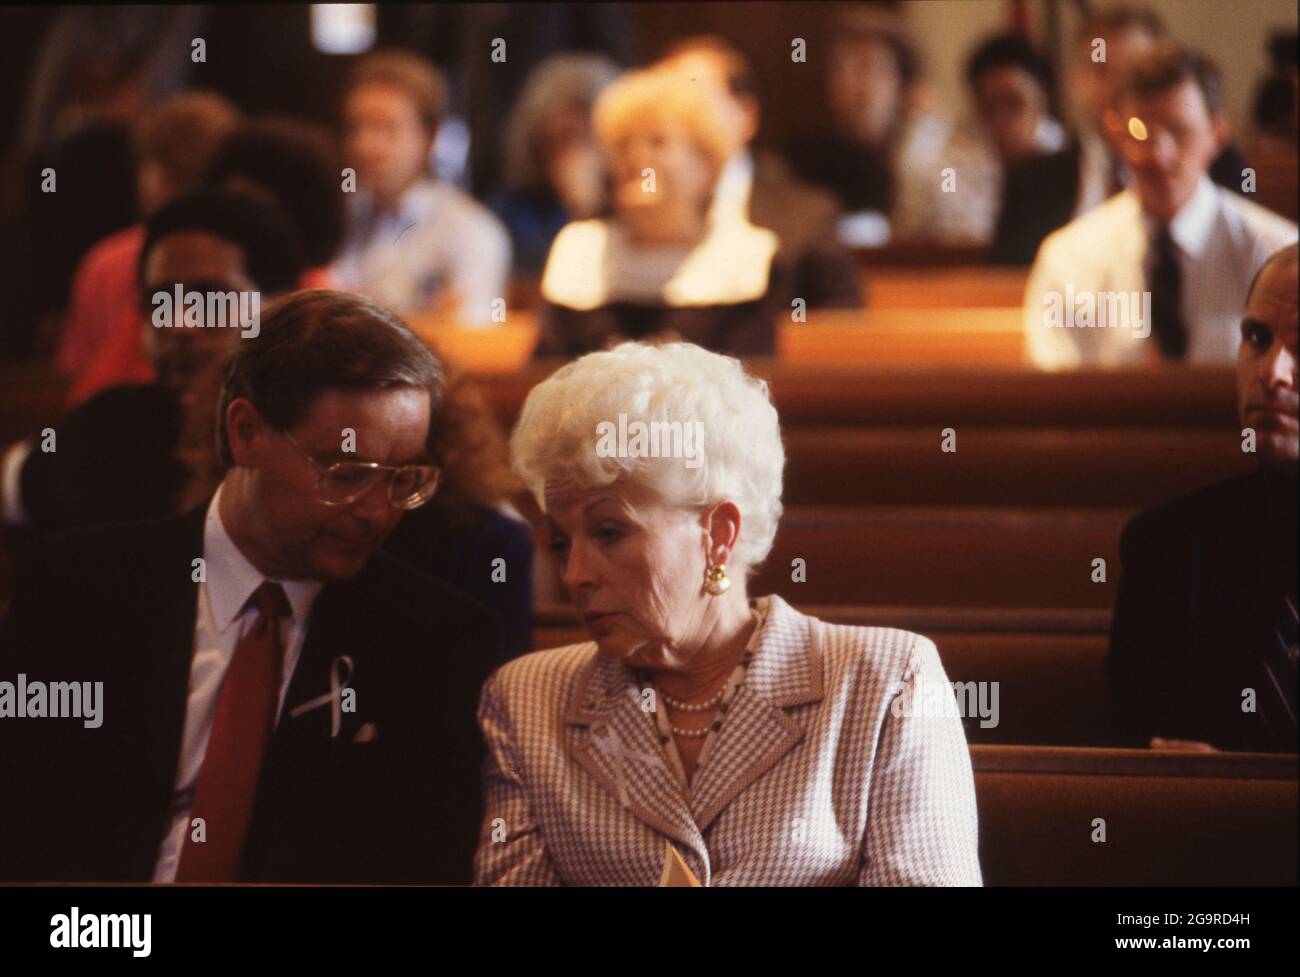 Killeen Texas USA, October 1991: Texas Governor Ann Richards attends a memorial  service for victims of a mass shooting at Luby's Cafeteria in Killeen. on October 16. George Hennard, a 35-year-old Killeen resident, crashed a pickup into the eatery and shot 23 people to death before killing himself. ©Bob Daemmrich Stock Photo